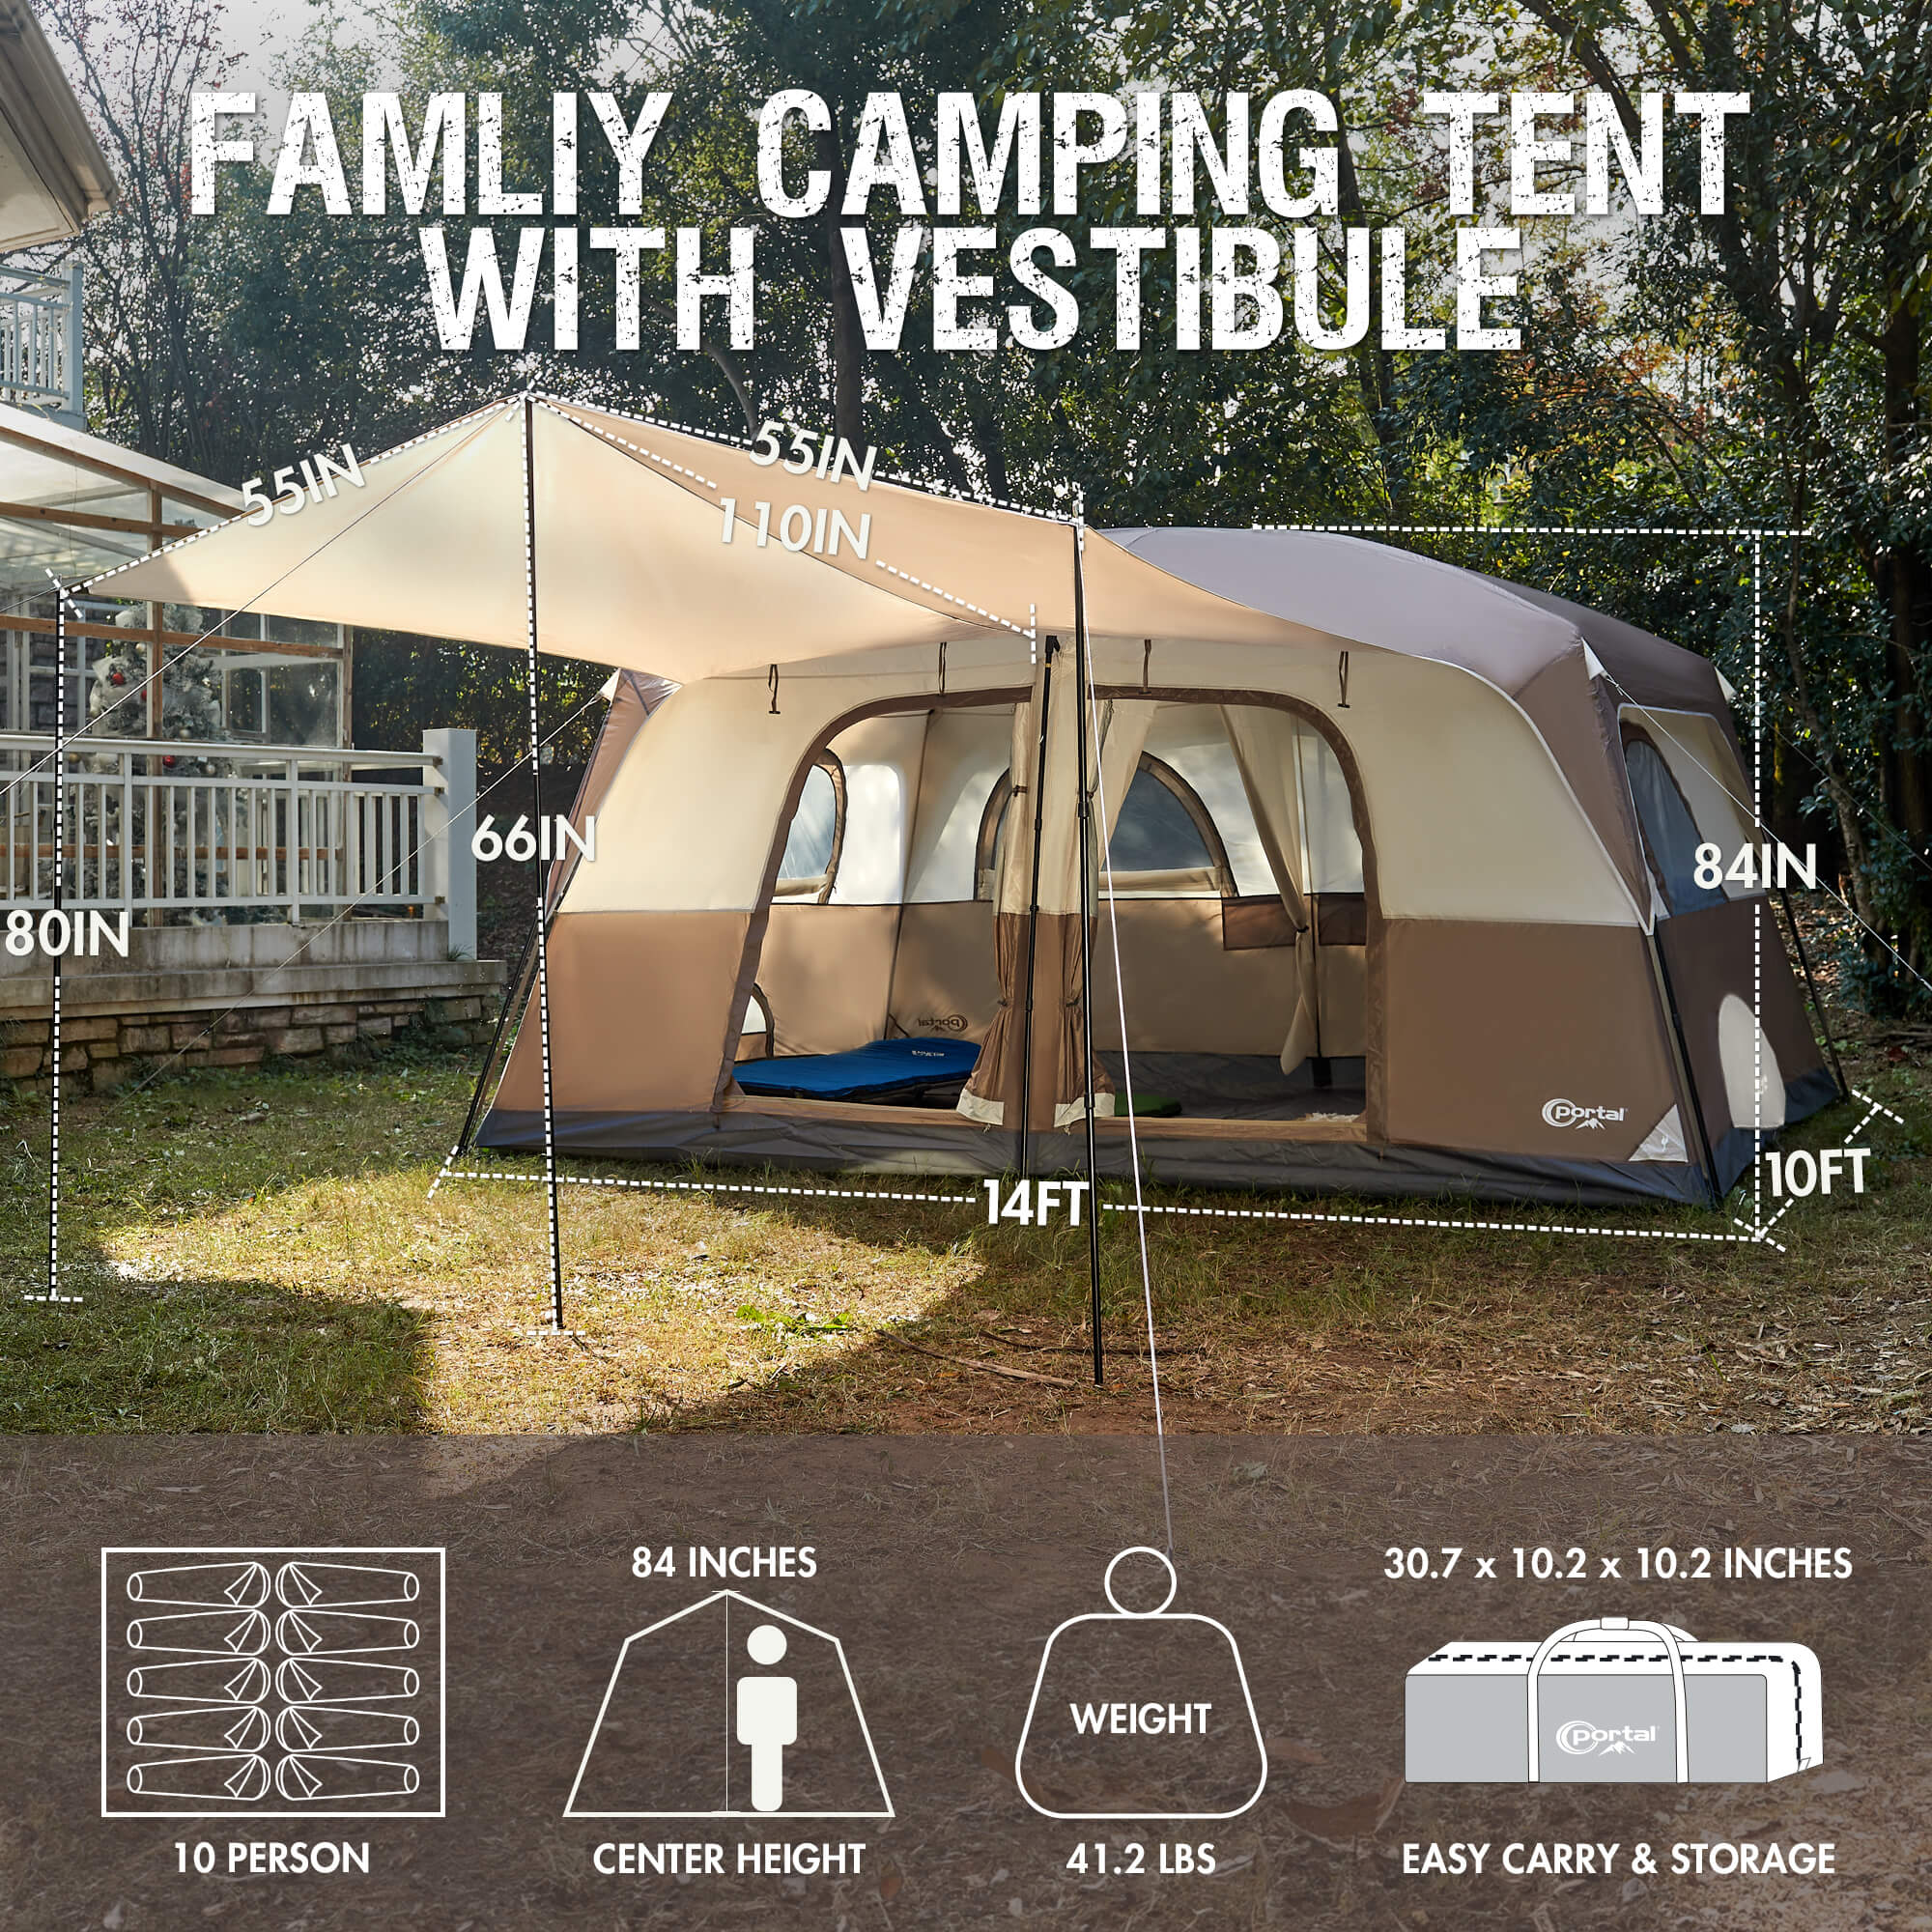 10 Person Family Tent With Rooms